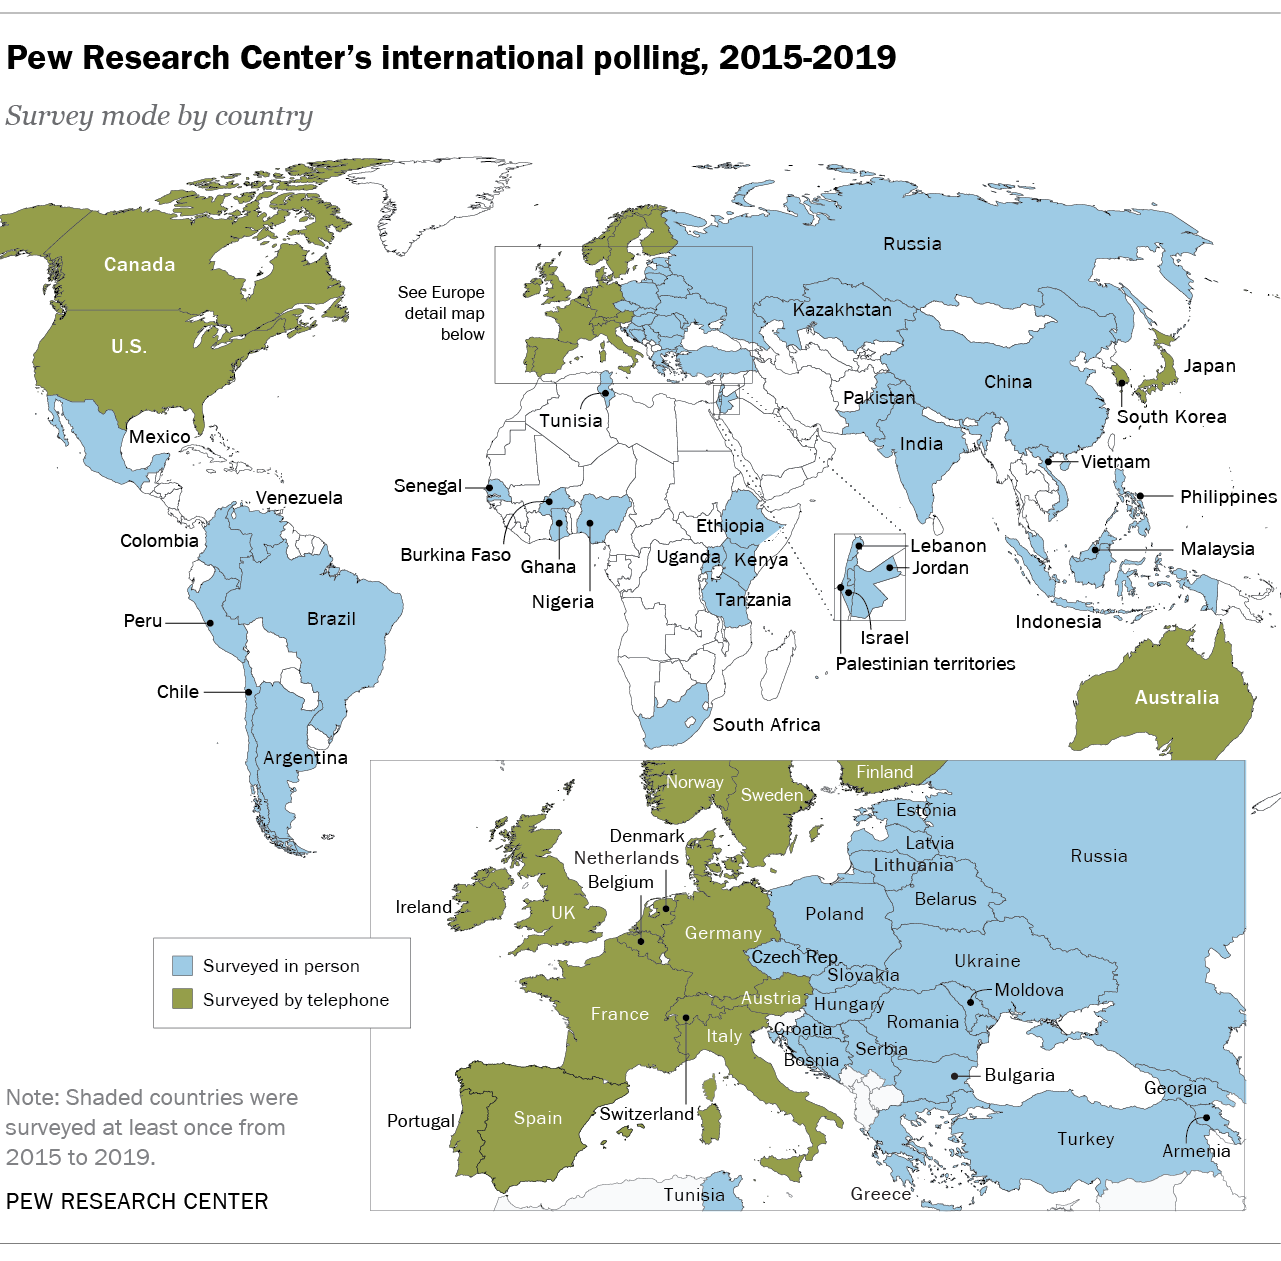 Pew Research Center's international polling, 2015-2019